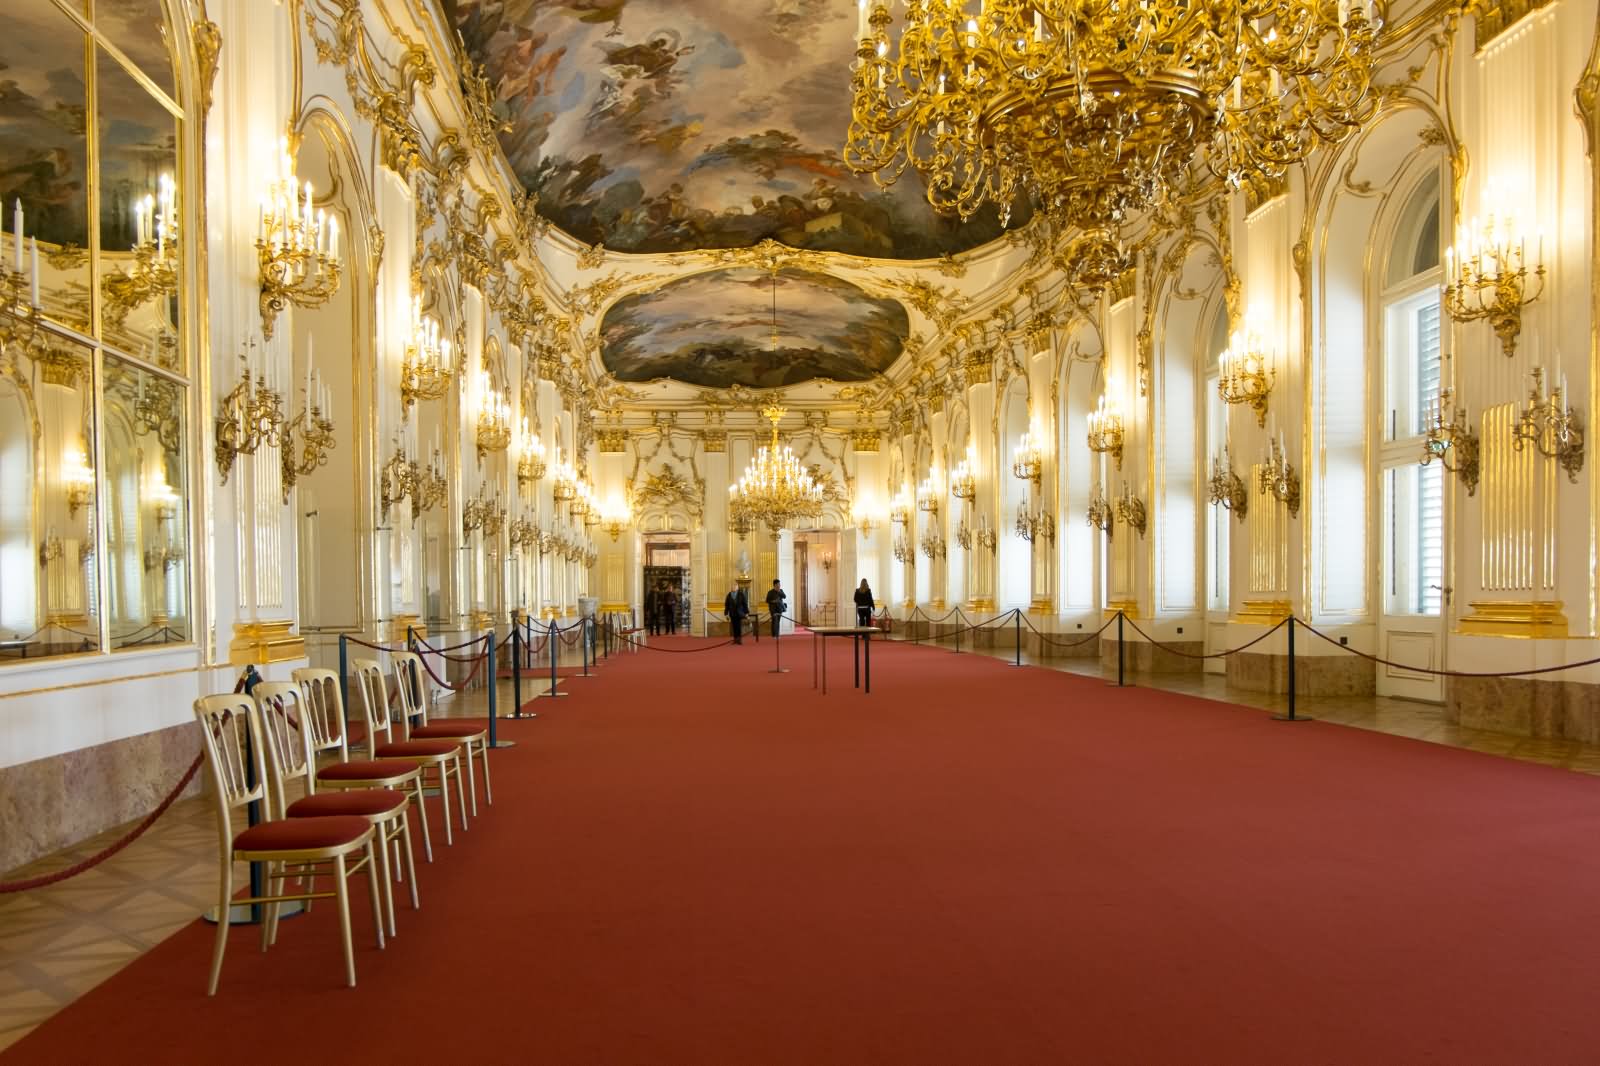 Gallery Inside The Schonbrunn Palace In Vienna